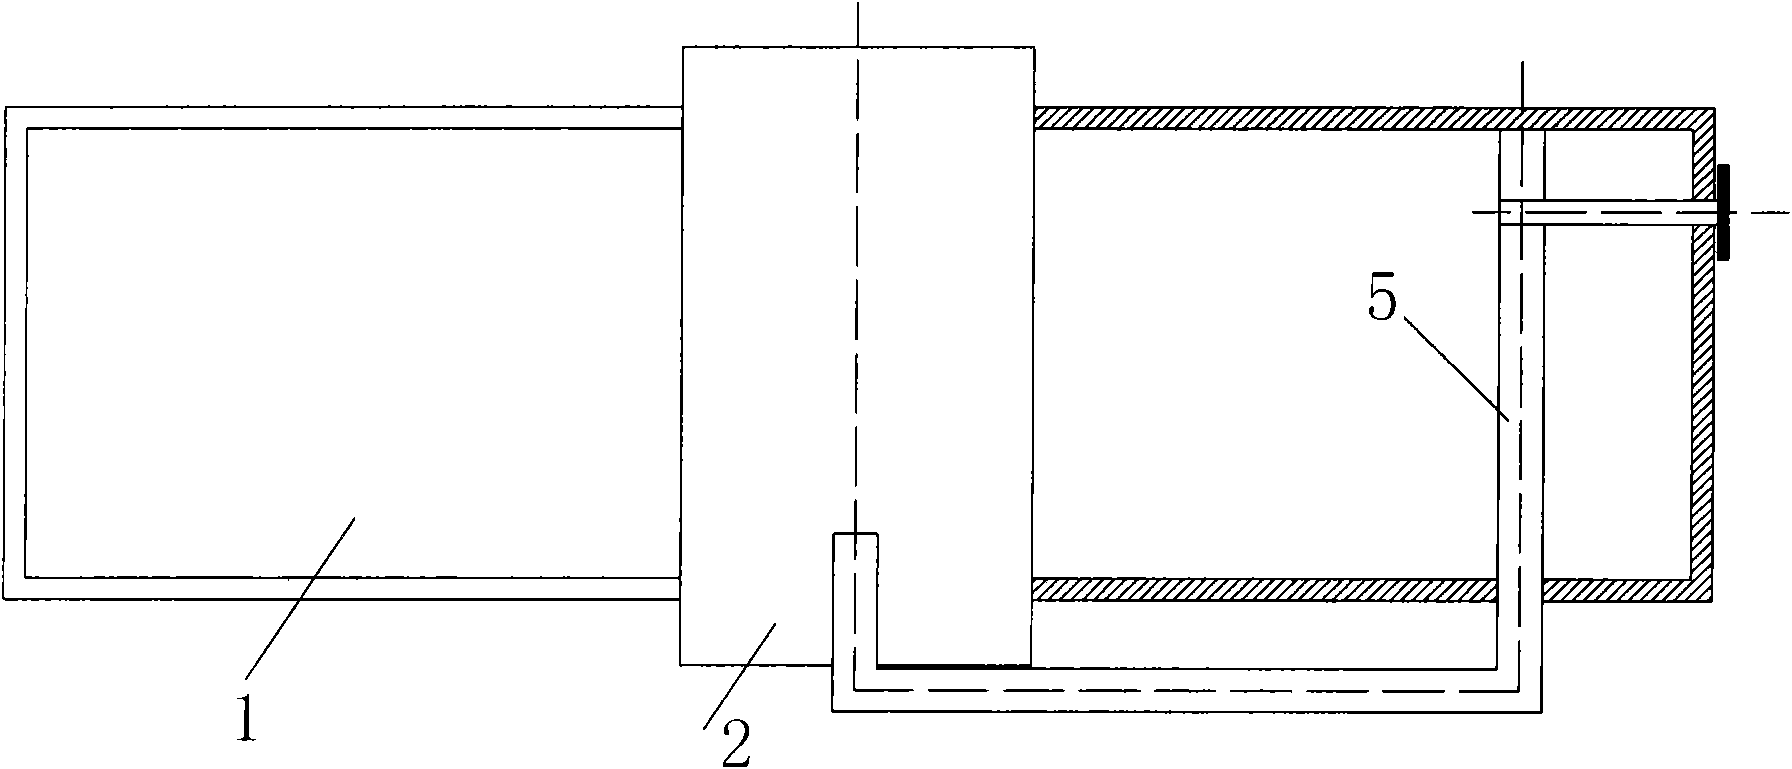 Alcohol-base fuel burner with radiant panel fuel nozzle